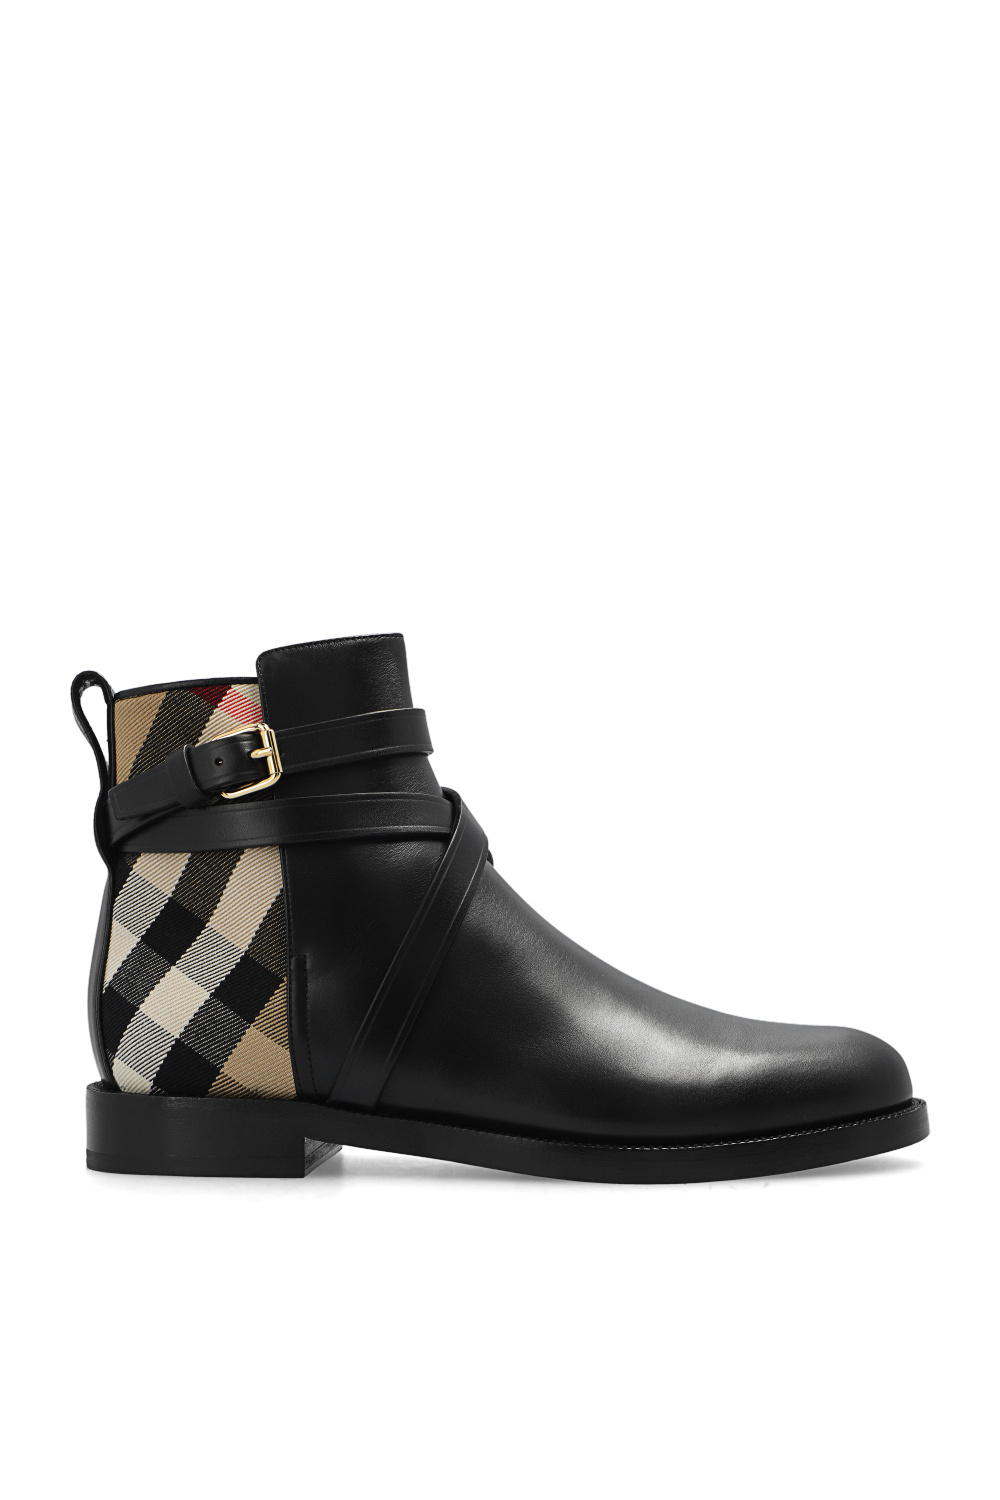 Burberry 'New Pryle' ankle boots | Women's Shoes | Vitkac